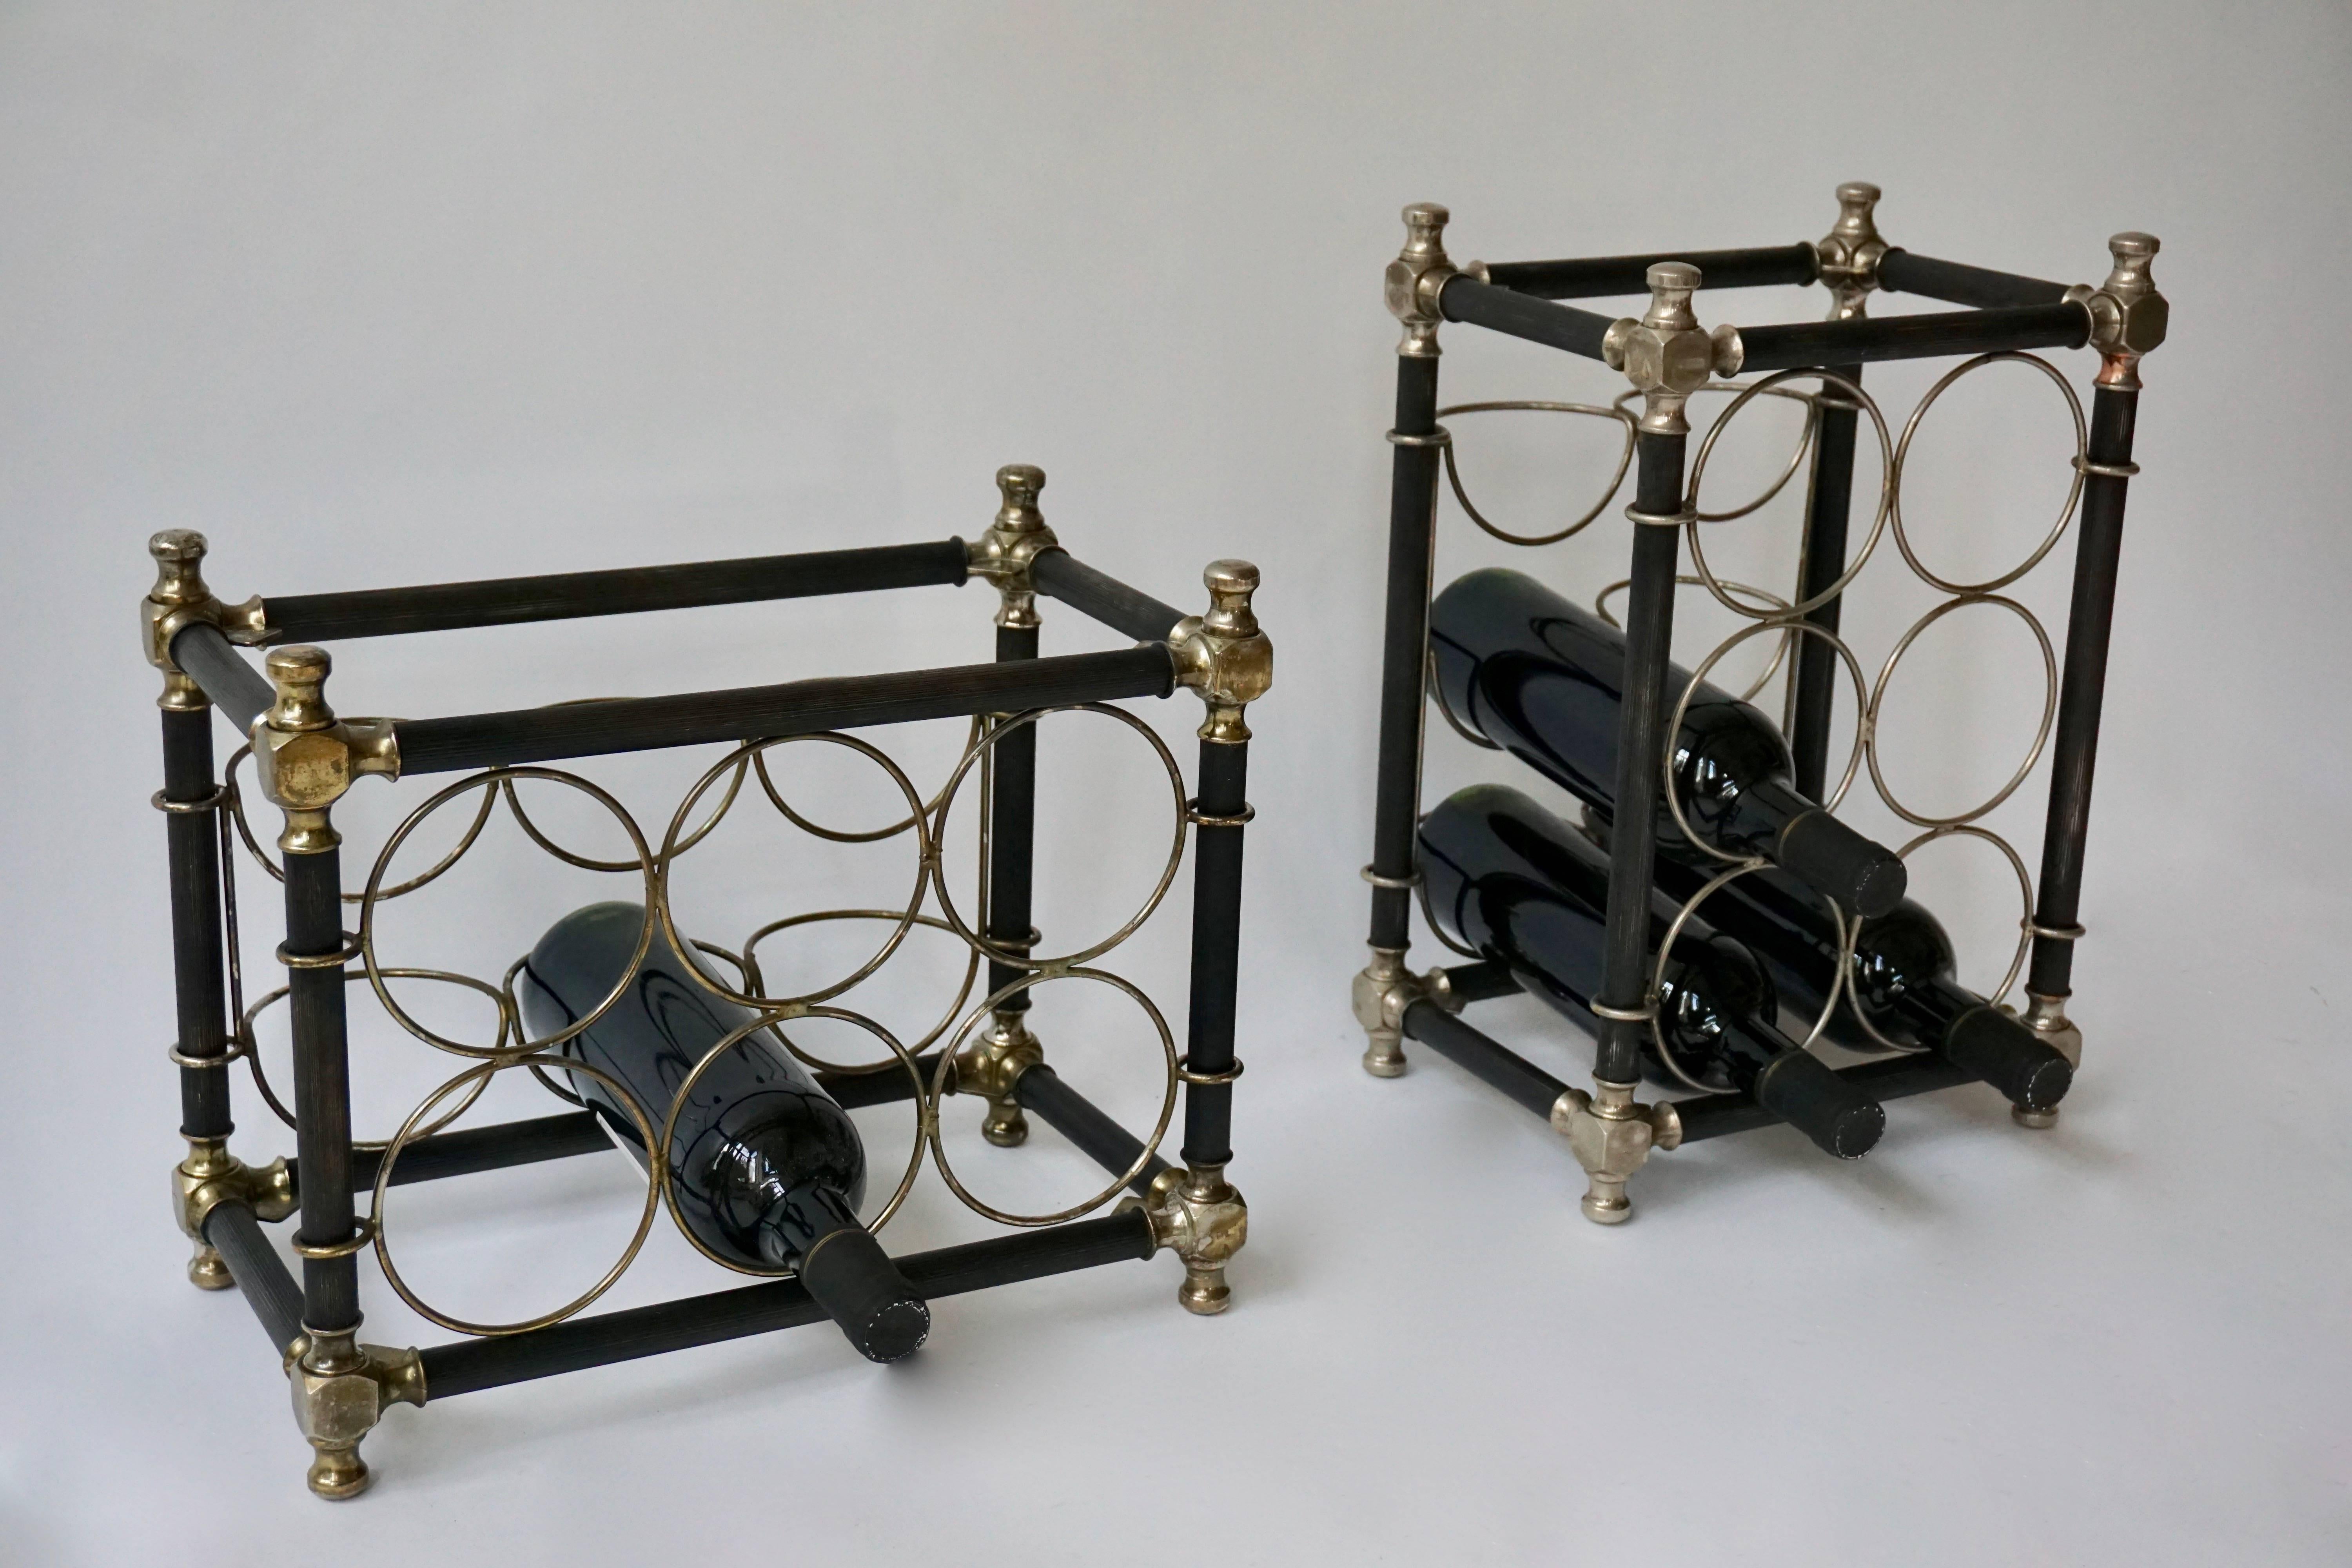 Two small brass wine racks suitable for counter top made for six bottles.
Italy, 1970s.
Measures: Height 41 cm, width 27 cm, depth 21 cm.
Height 31 cm, width 37 cm, depth 21 cm.
  